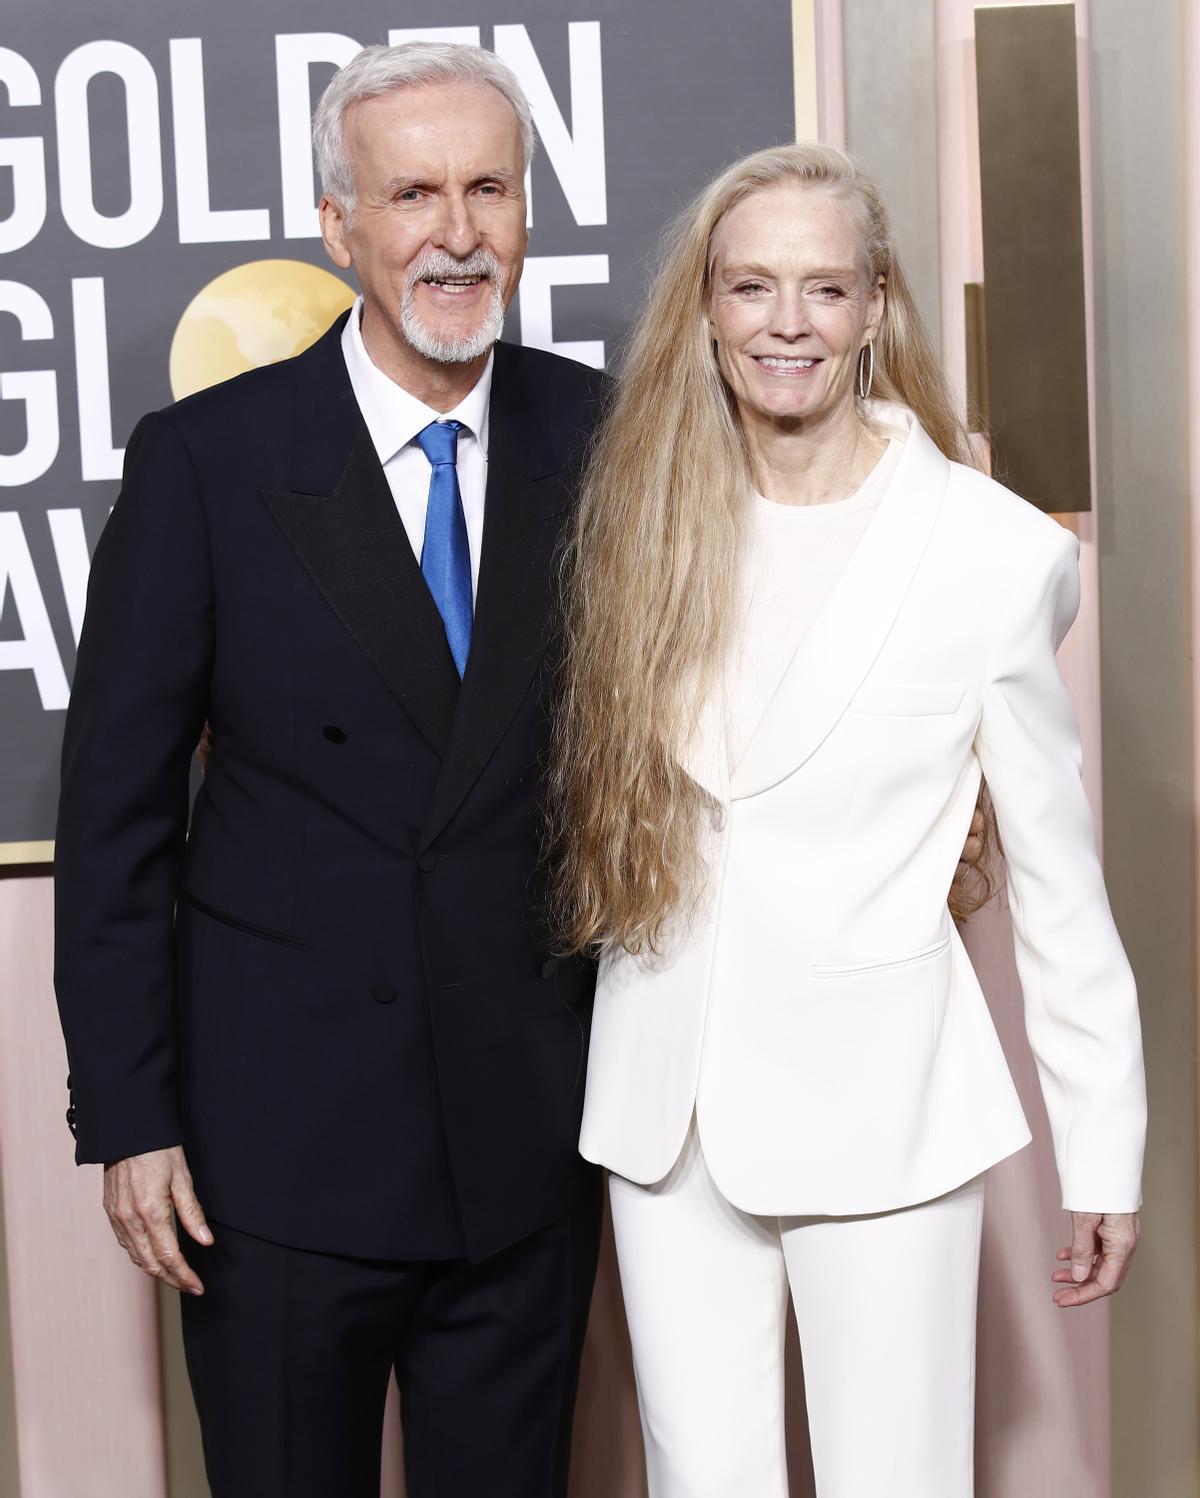 Beverly Hills (United States), 10/01/2023.- James Cameron (L) and Suzy Amis (R) arrive for the 80th annual Golden Globe Awards ceremony at the Beverly Hilton Hotel, in Beverly Hills, California, USA, 10 January 2023. Artists in various film and television categories are awarded Golden Globes by the Hollywood Foreign Press Association. (Estados Unidos) EFE/EPA/CAROLINE BREHMAN